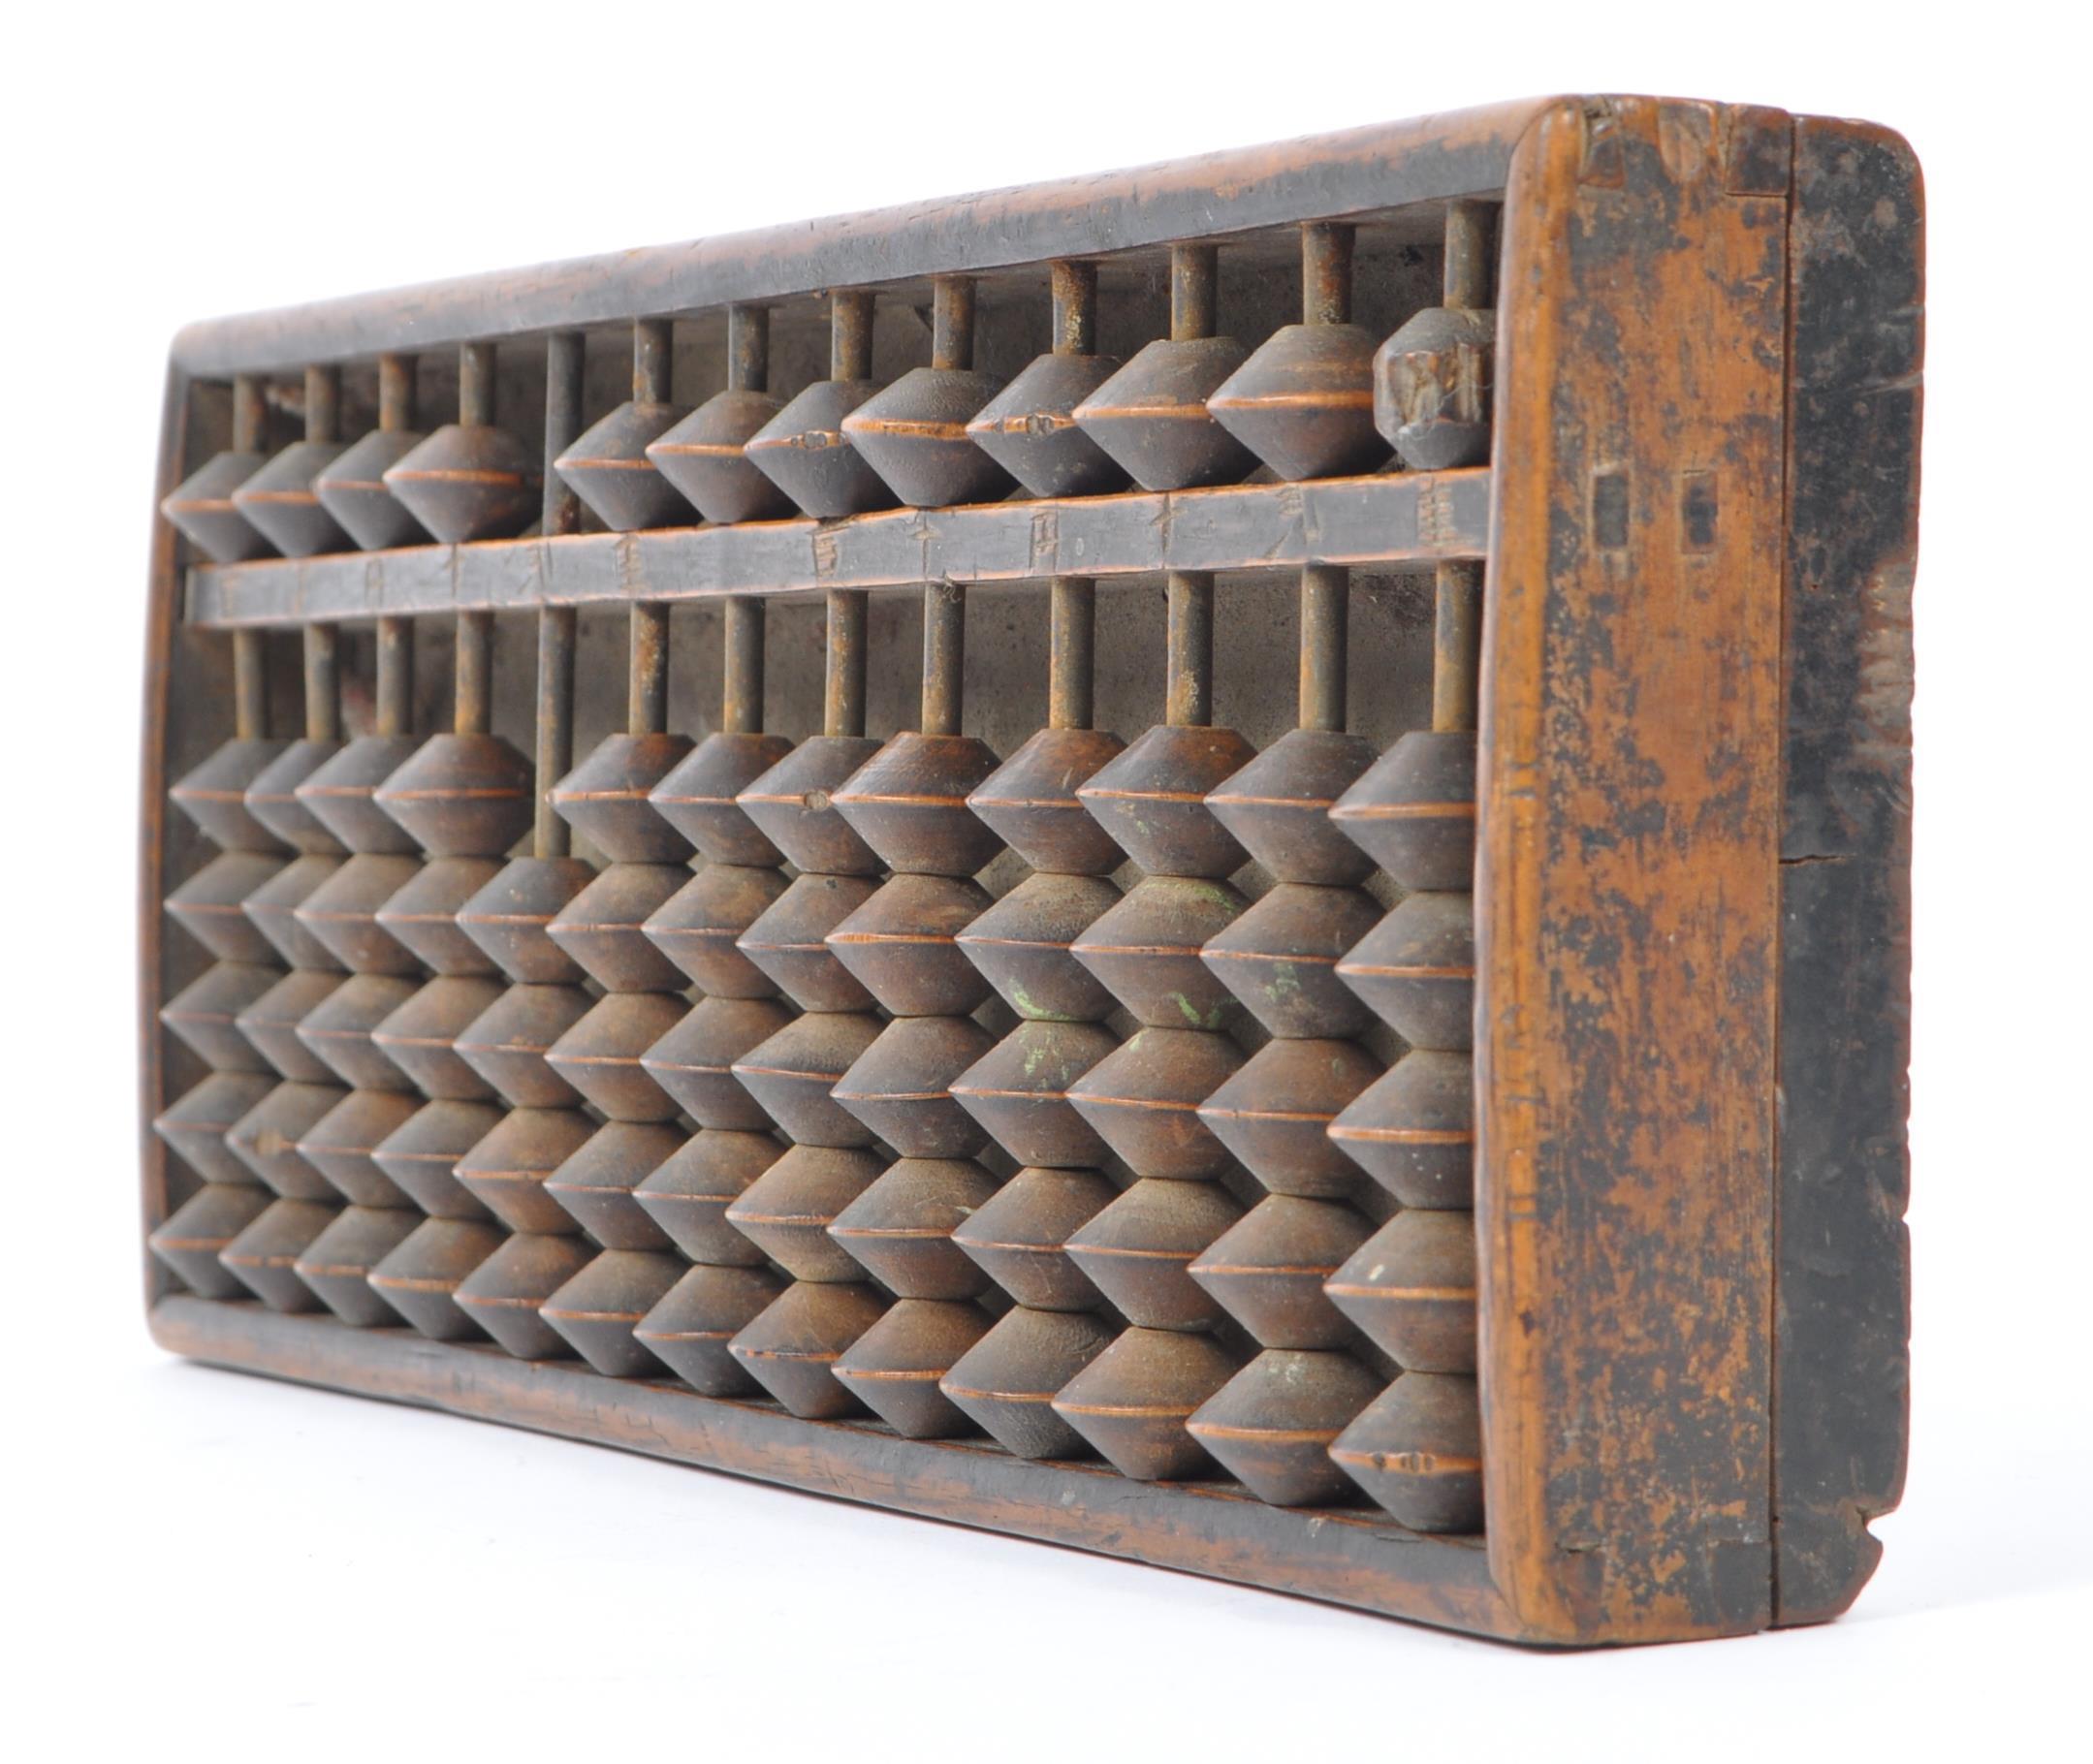 EARLY 20TH CENTURY CHINESE WOOD ABACUS - Image 5 of 6